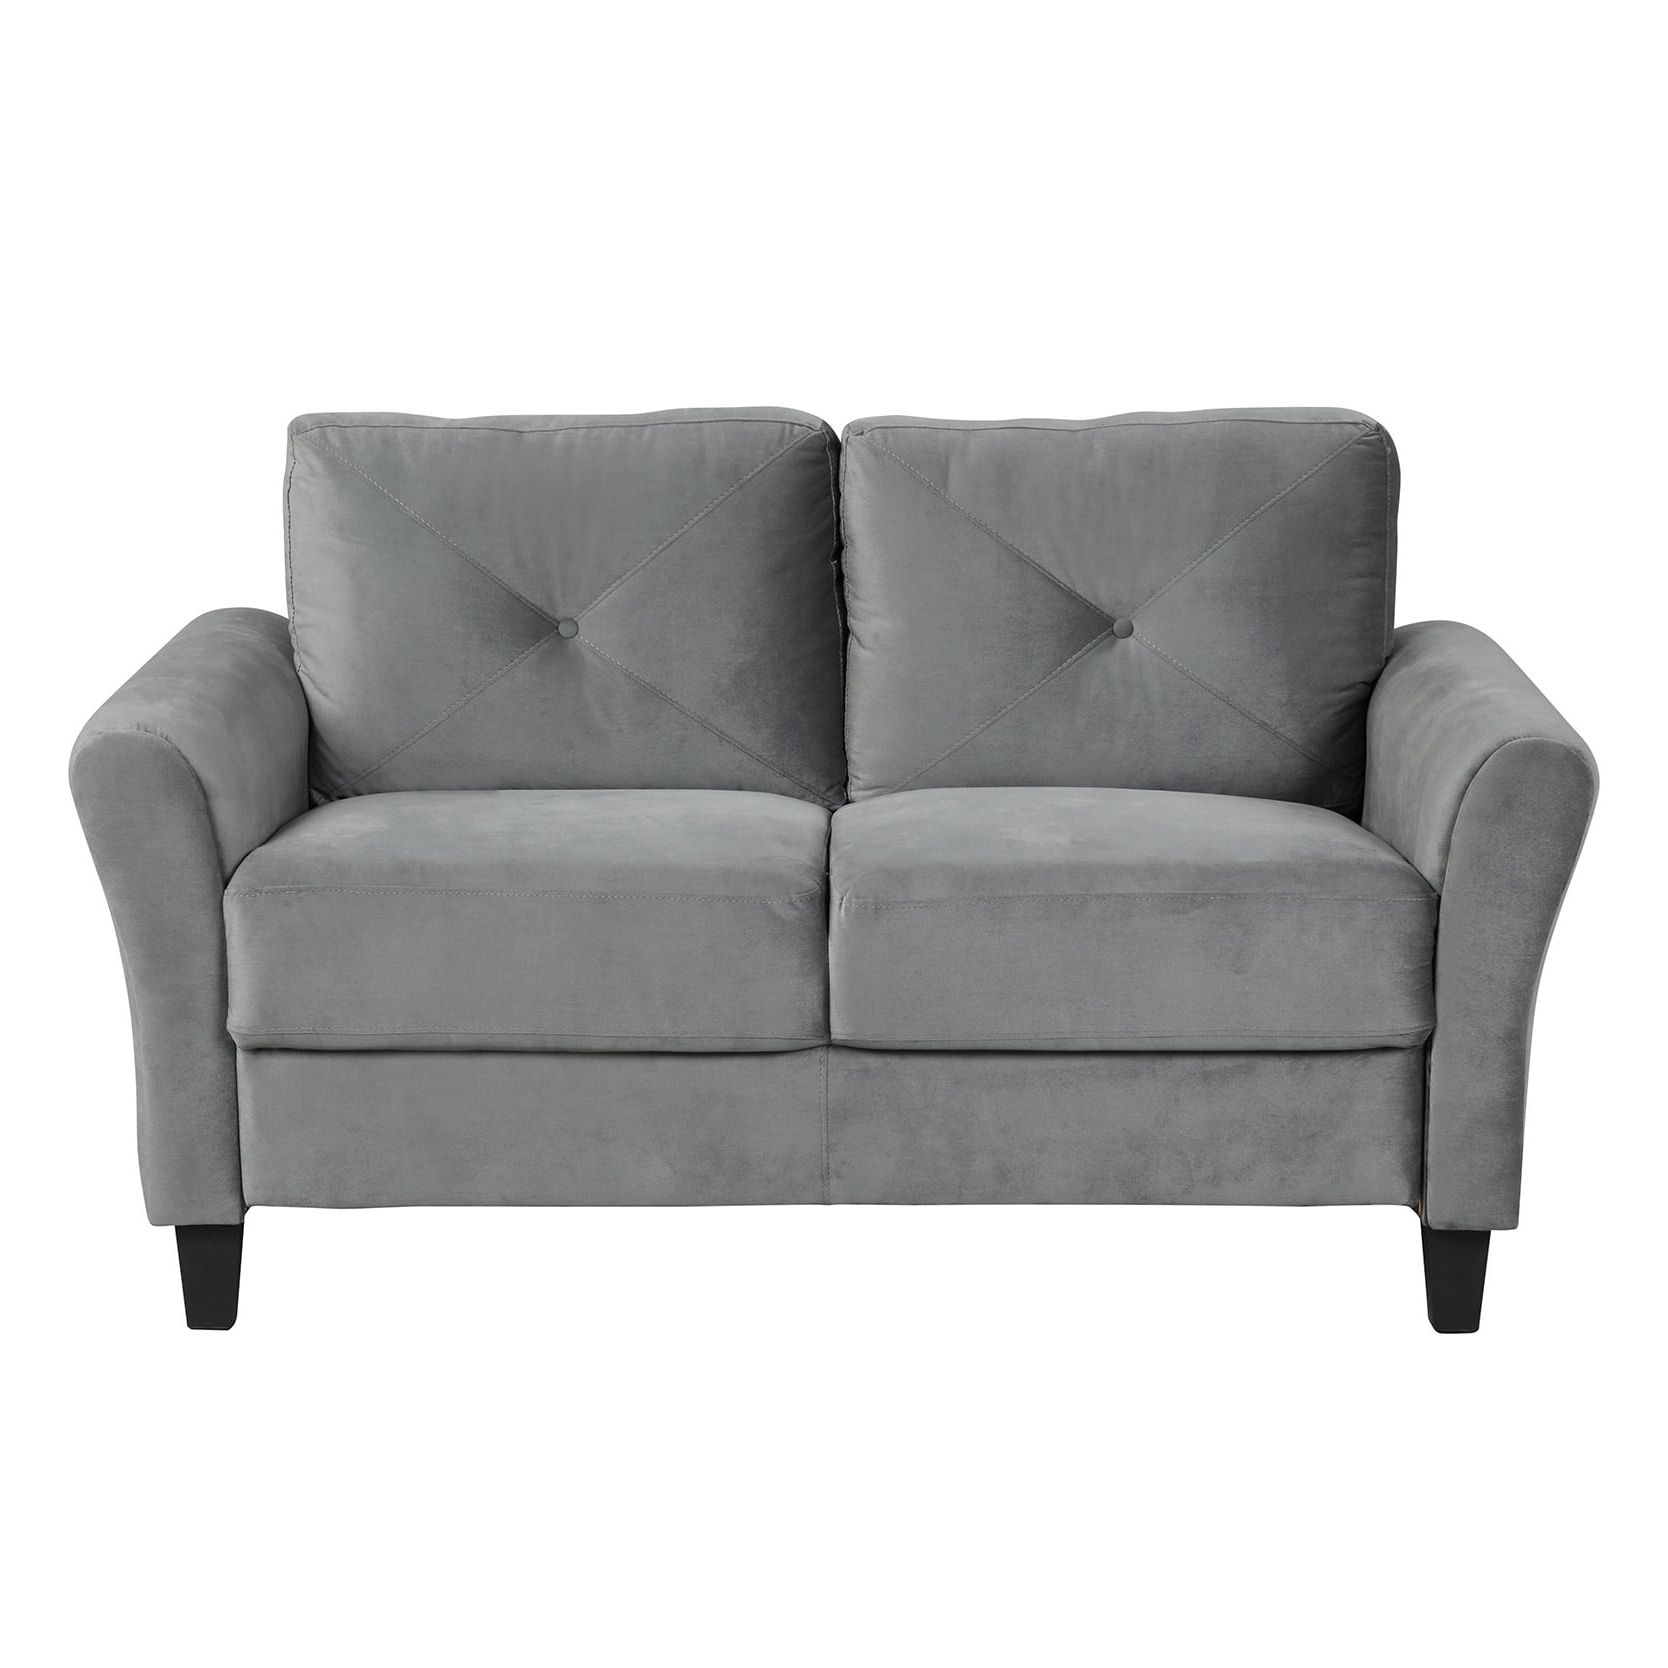 Modern Loveseat Sofa Sleeper Futon Couch Upholstered 2 Seater Sofa For Within Fashionable Modern Light Grey Loveseat Sofas (View 10 of 15)